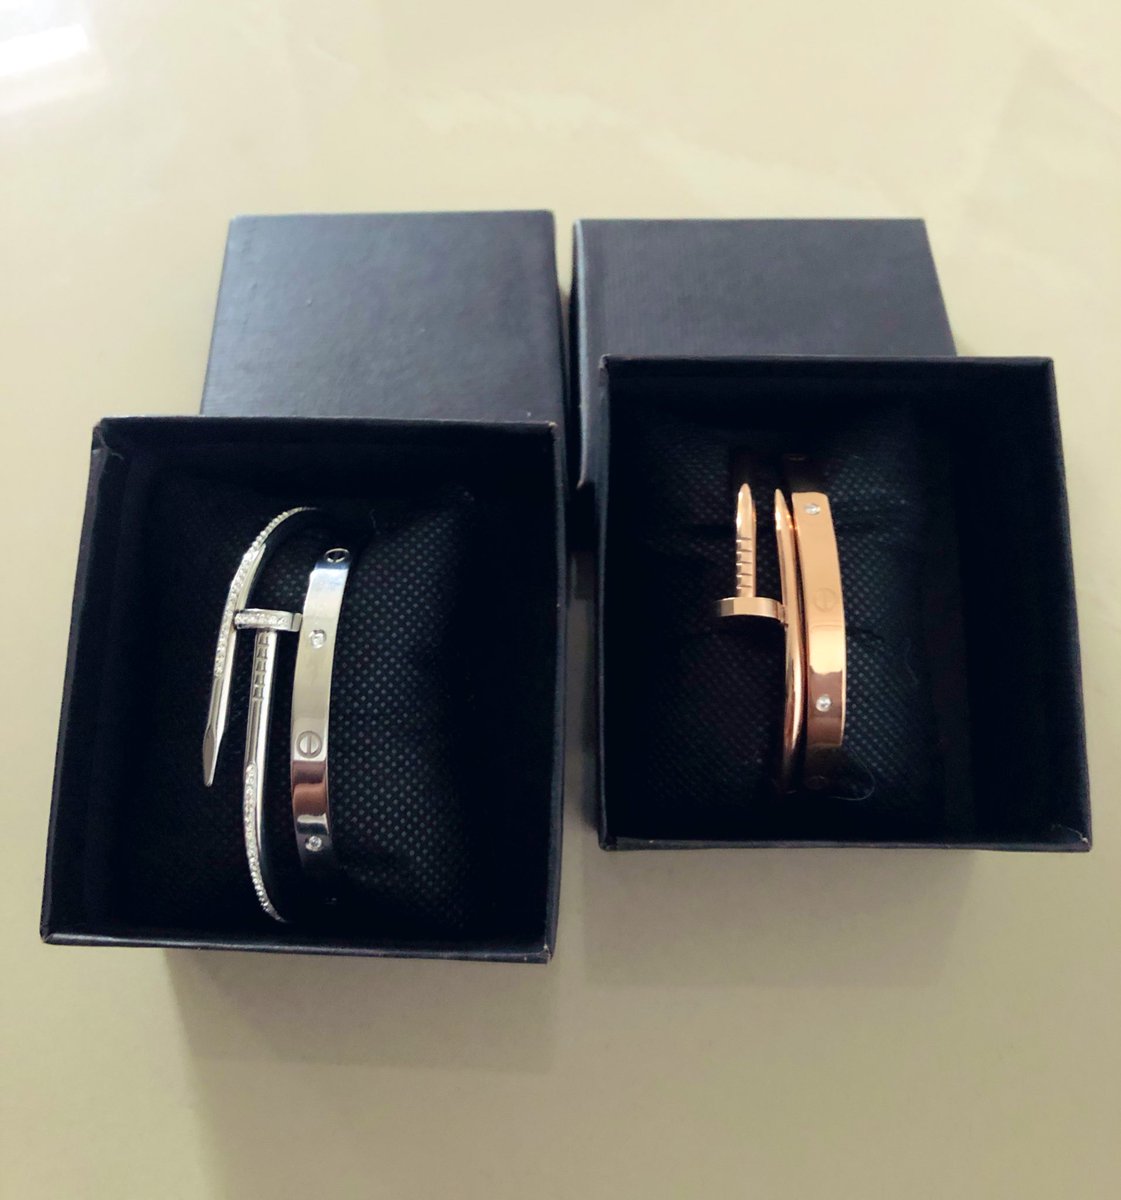 Our none-tarnish bangles still very much available Nail x cartierProce: 3000 naira each Available in gold, rose gold and silver Pls kindly send a dm to order Help rt #StefflonDon  #tangled  #backtoschool  #TuesdayMotivation